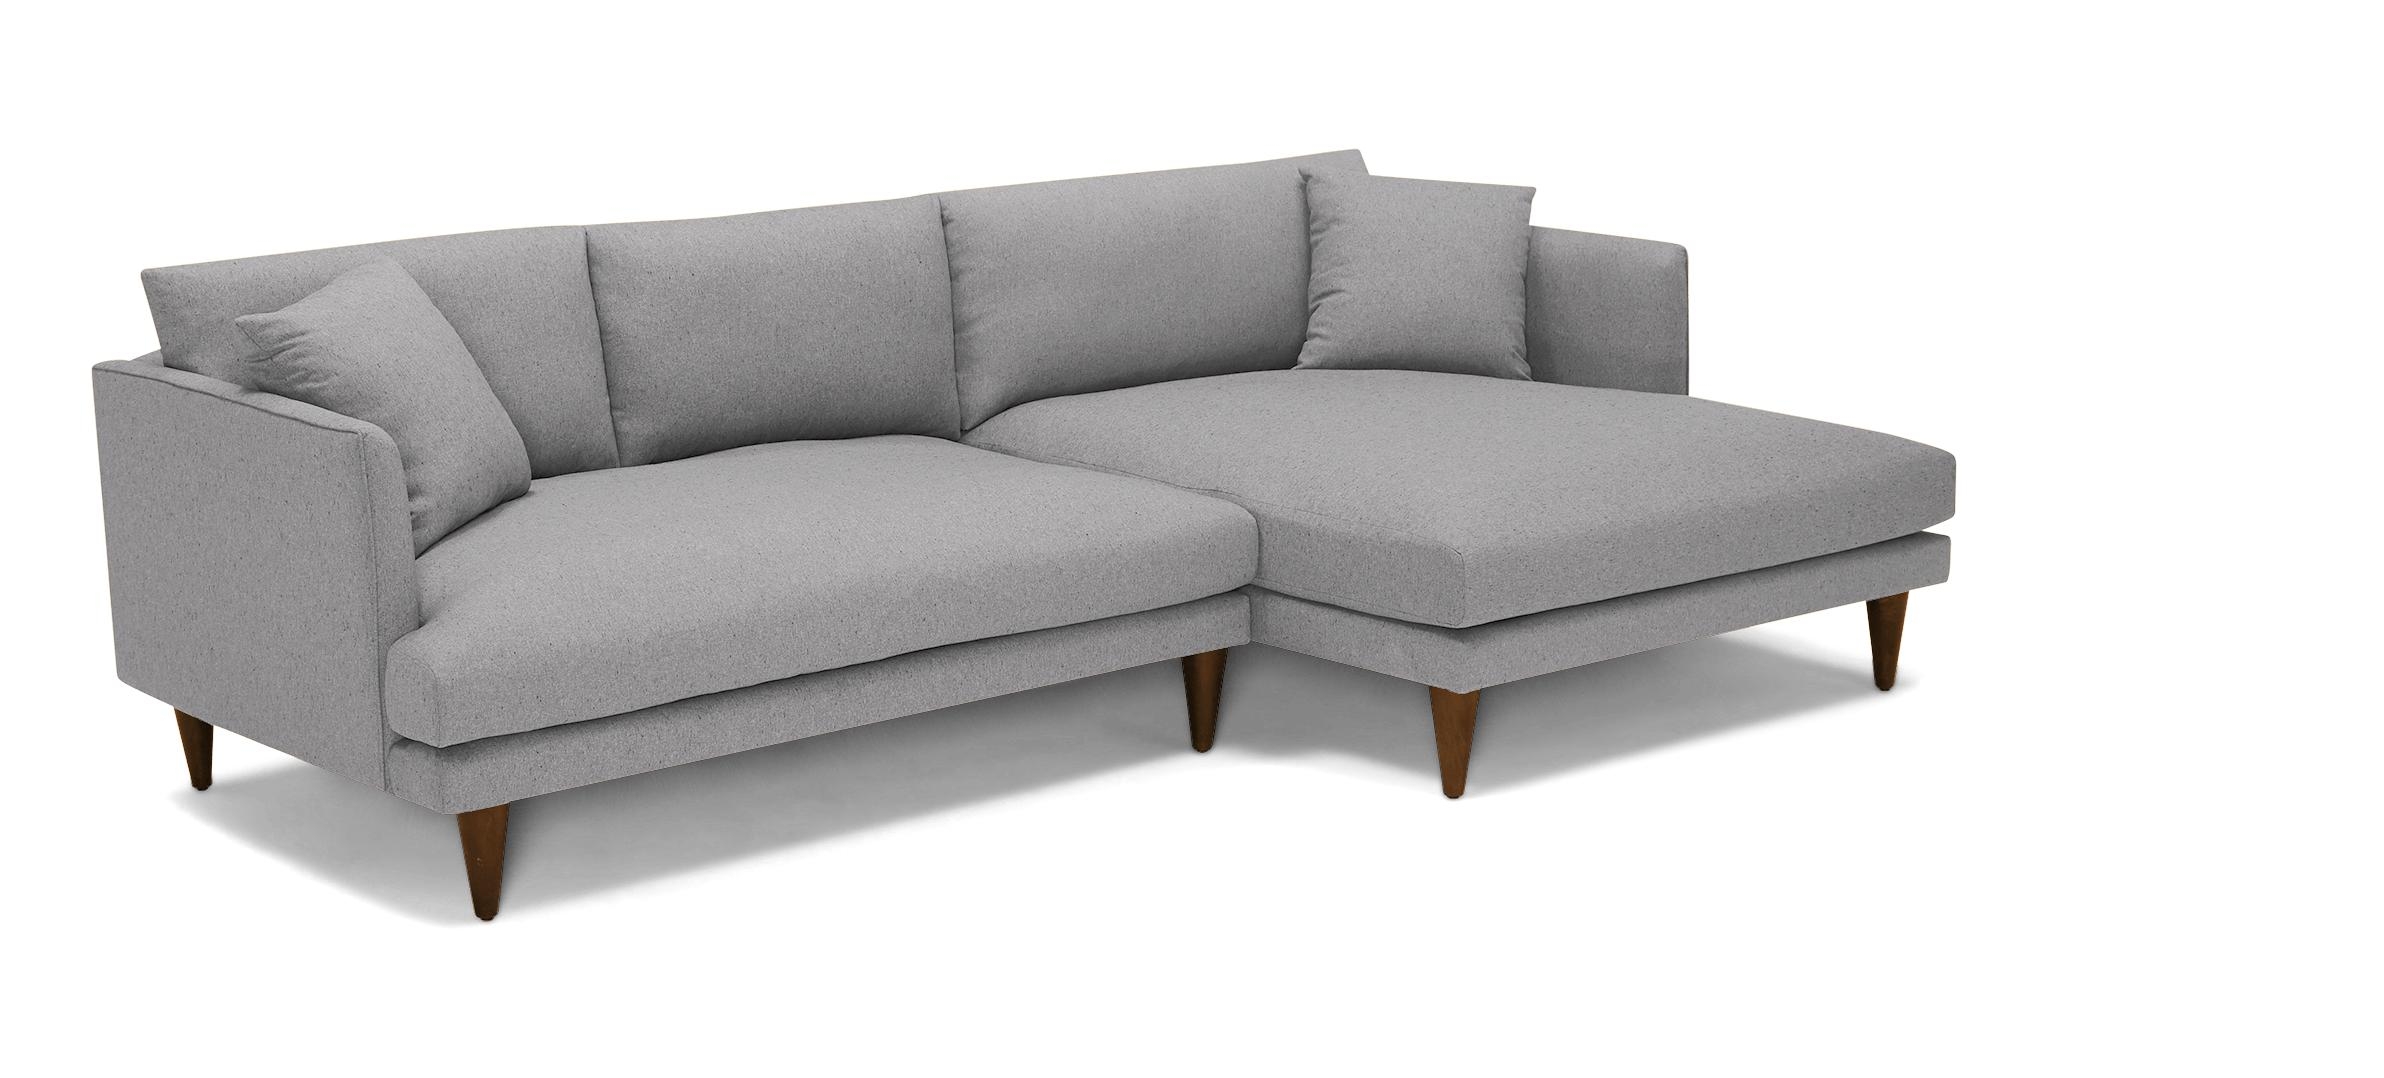 Gray Lewis Mid Century Modern Sectional - Royale Ash - Mocha - Left - Cone - Image 1